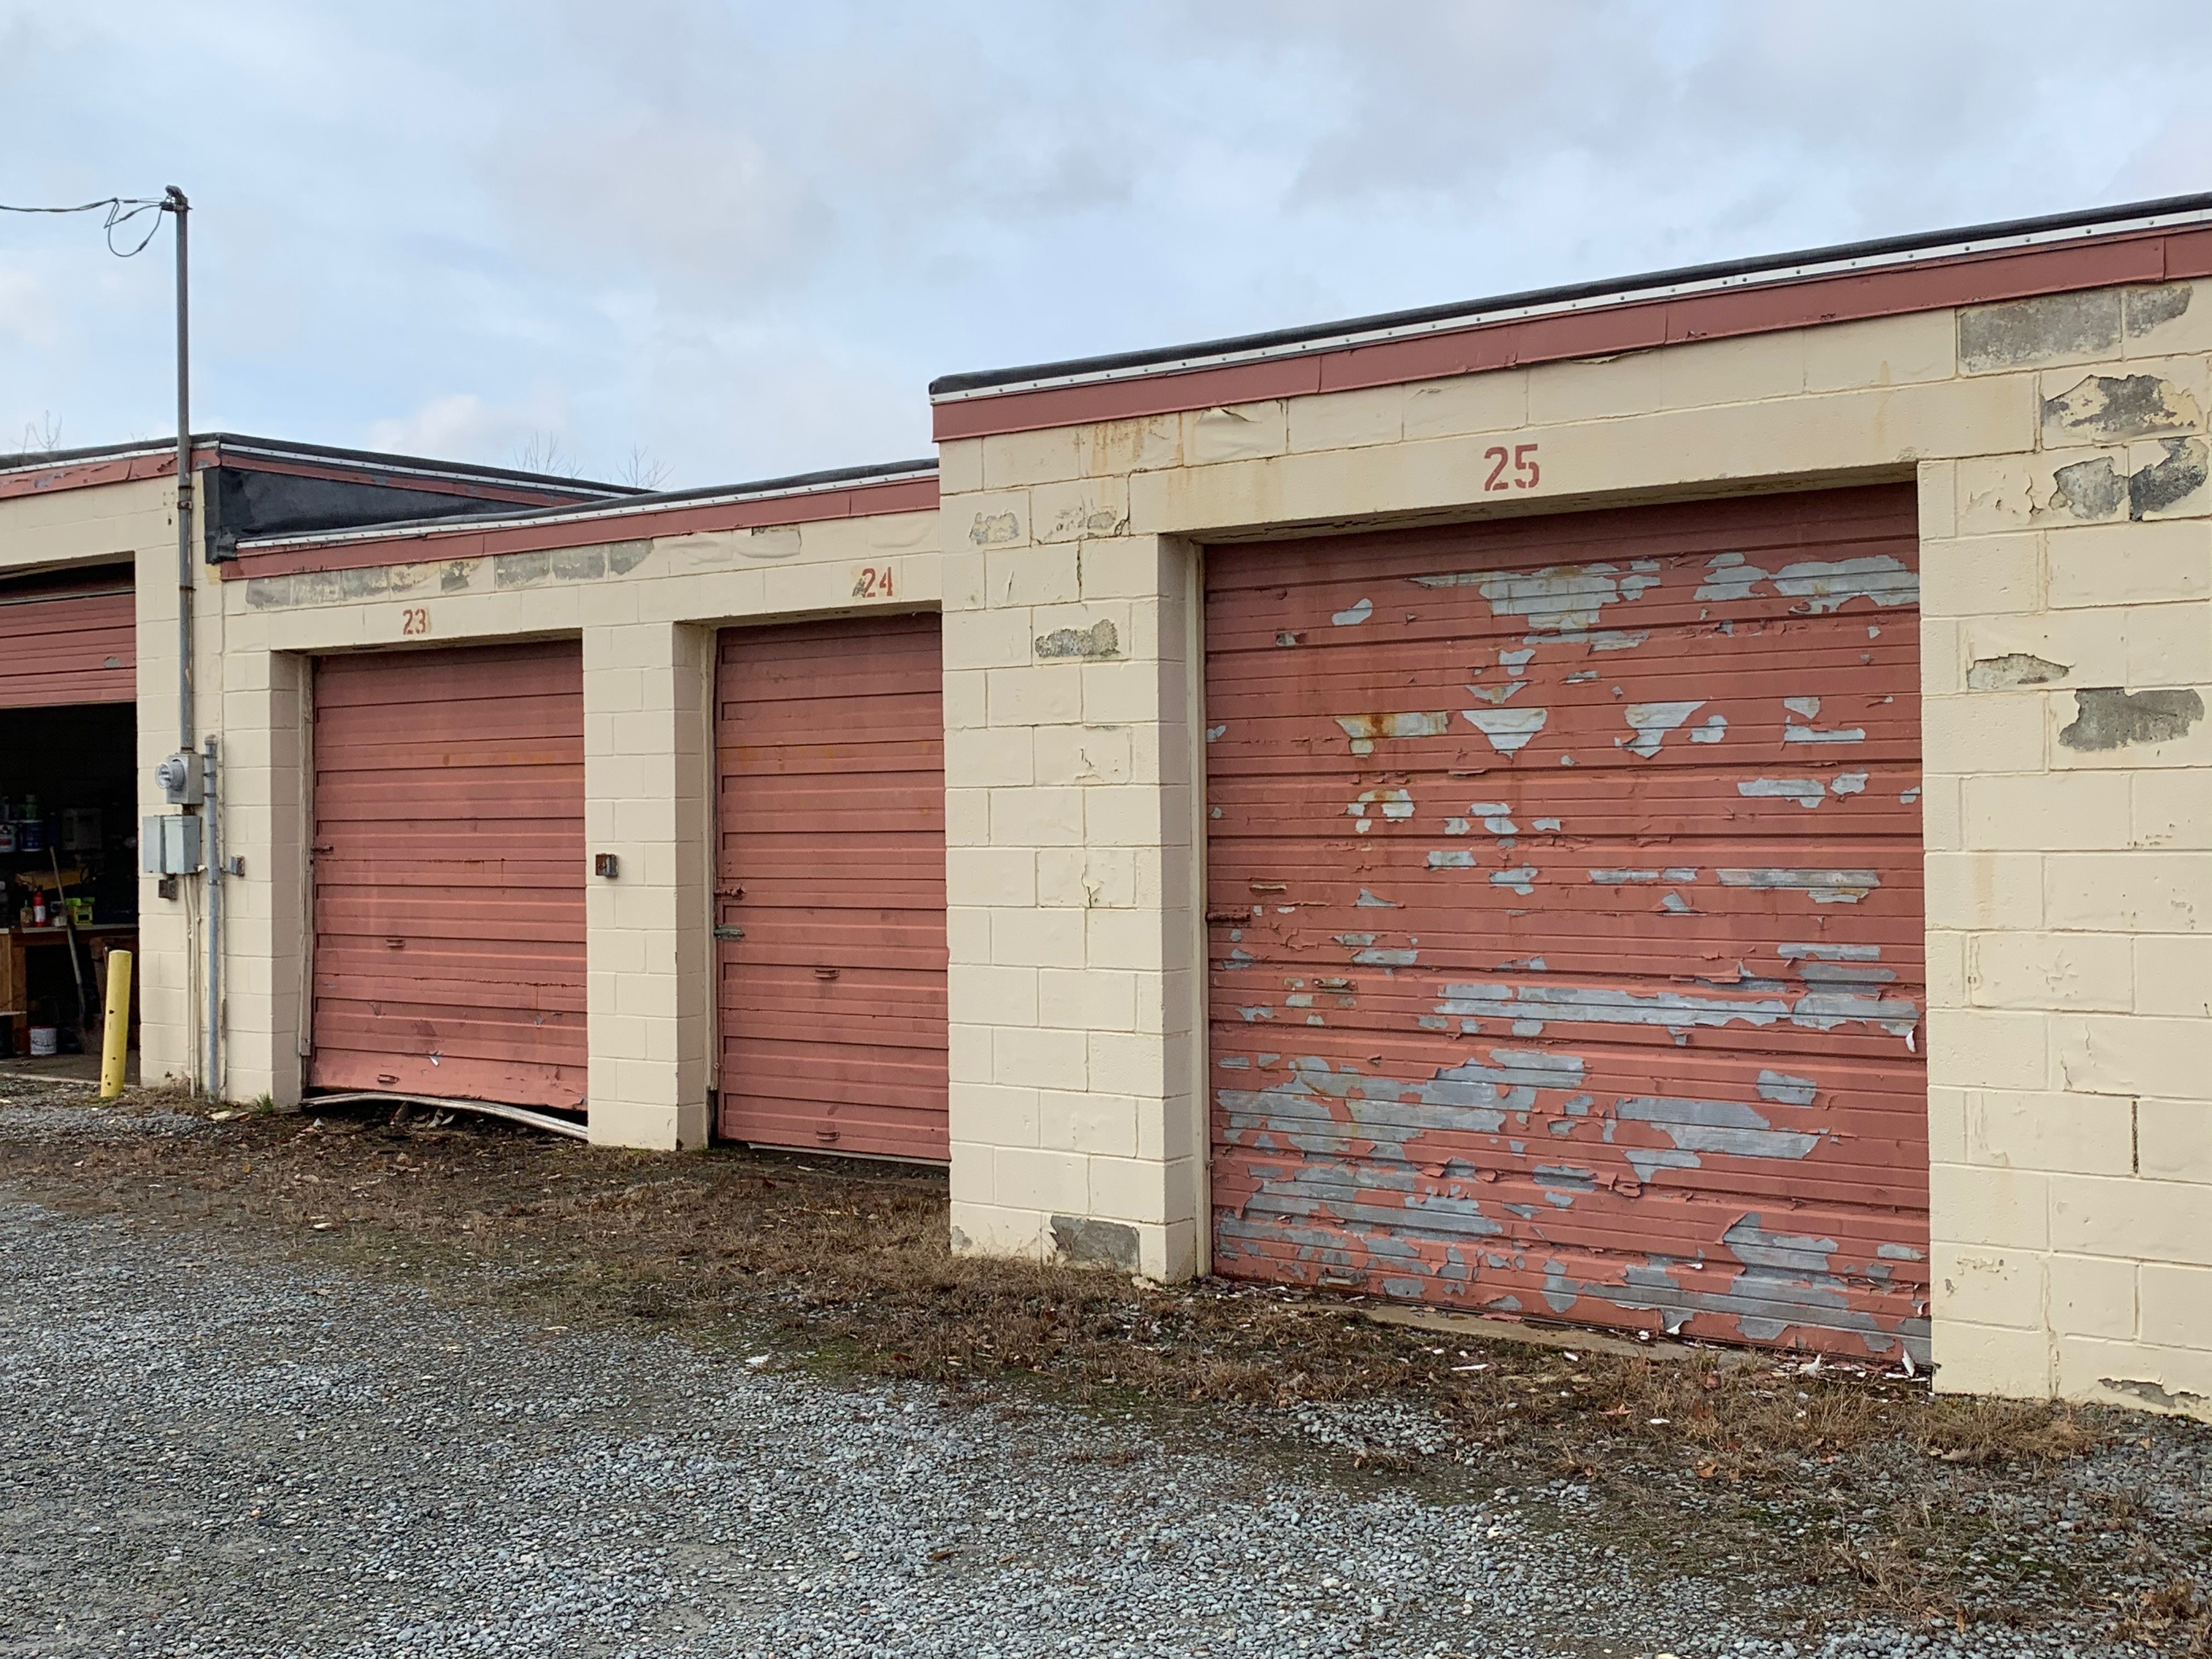 Outdated Self-Storage Doors in Need of Replacement